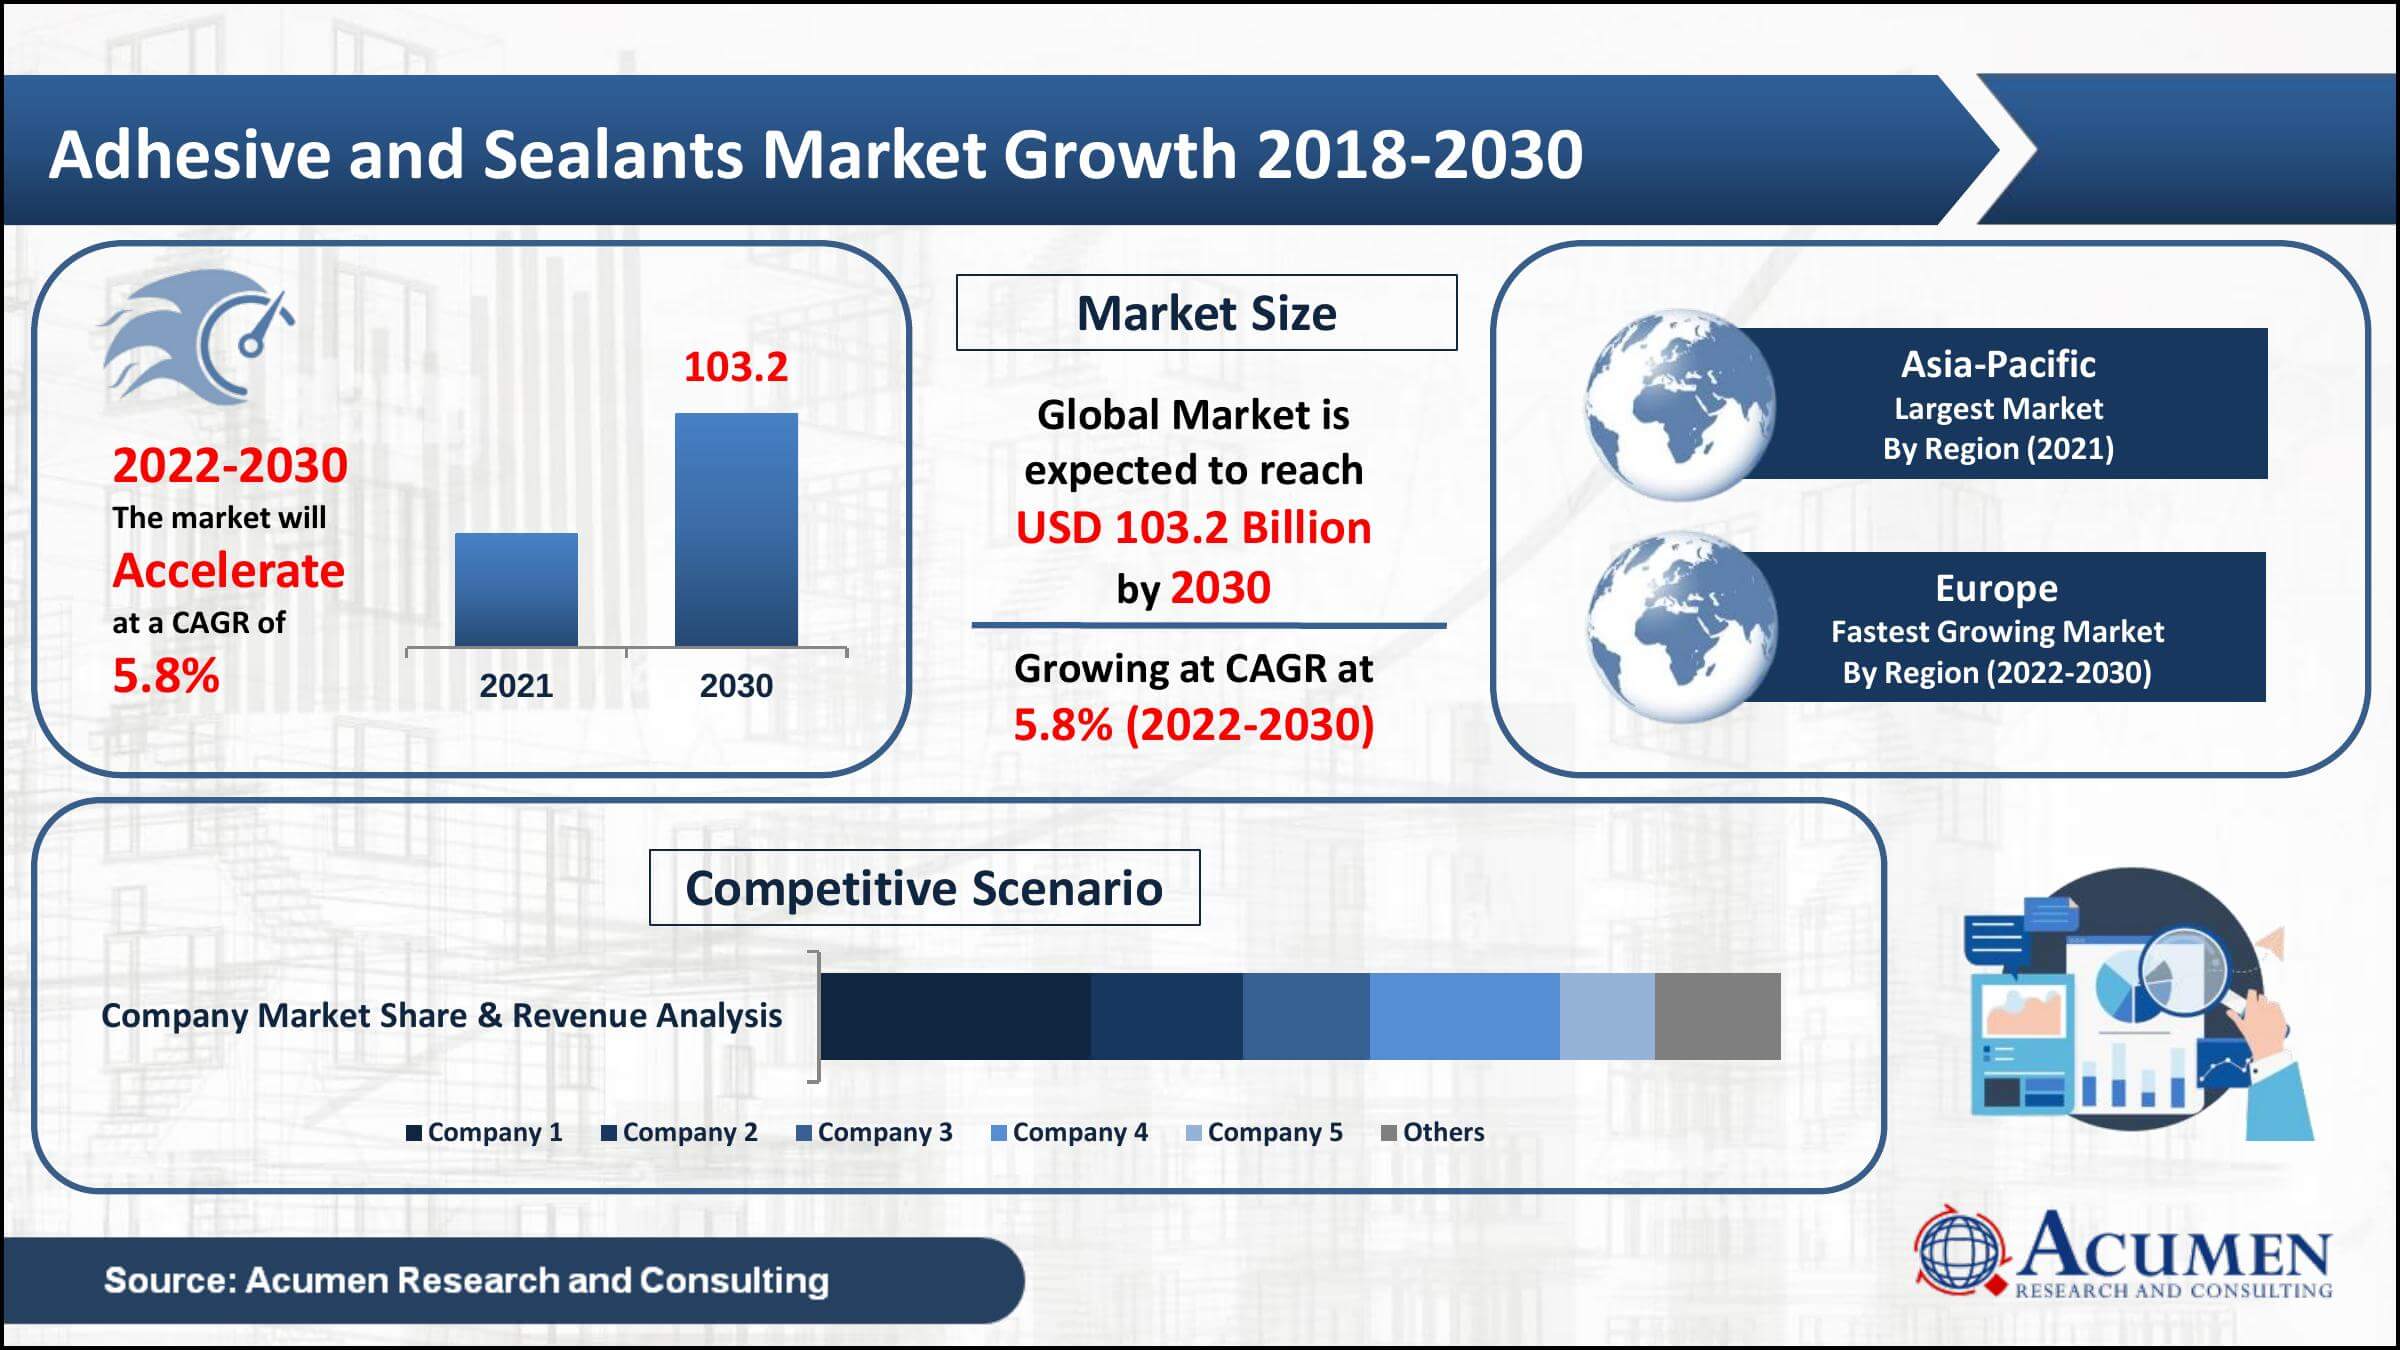 Global adhesive and sealants market revenue collected USD 62.9 Billion in 2021, with a 5.8% CAGR between 2022 and 2030